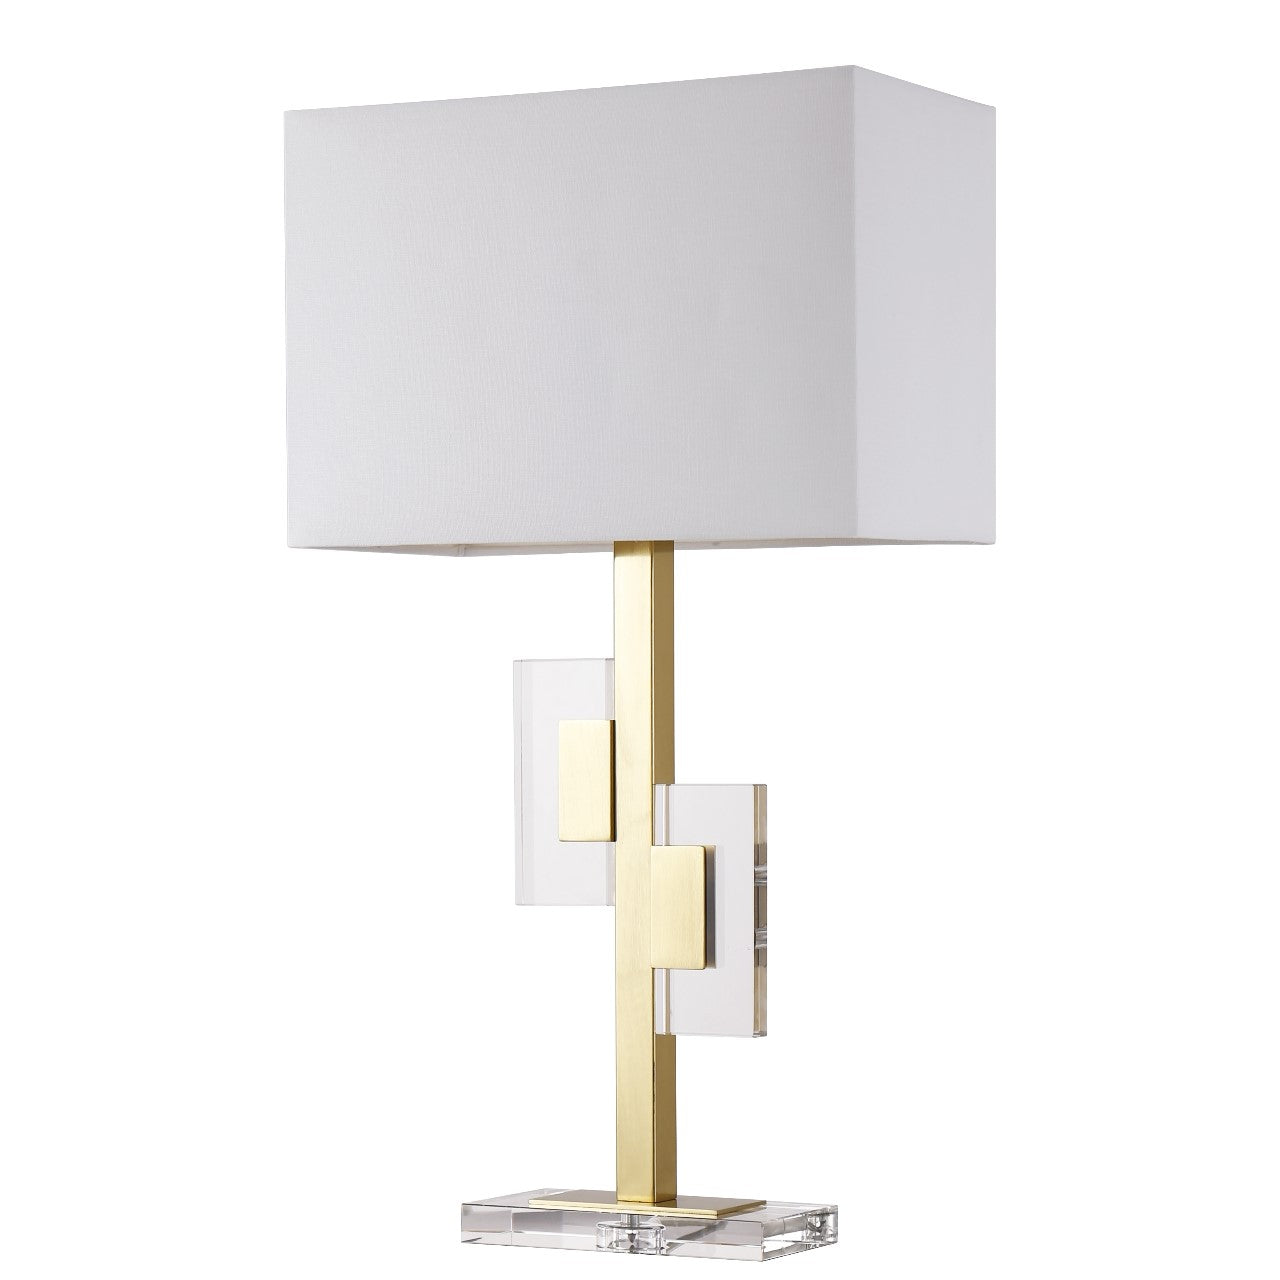 Table lamp, Gold, Large lamps